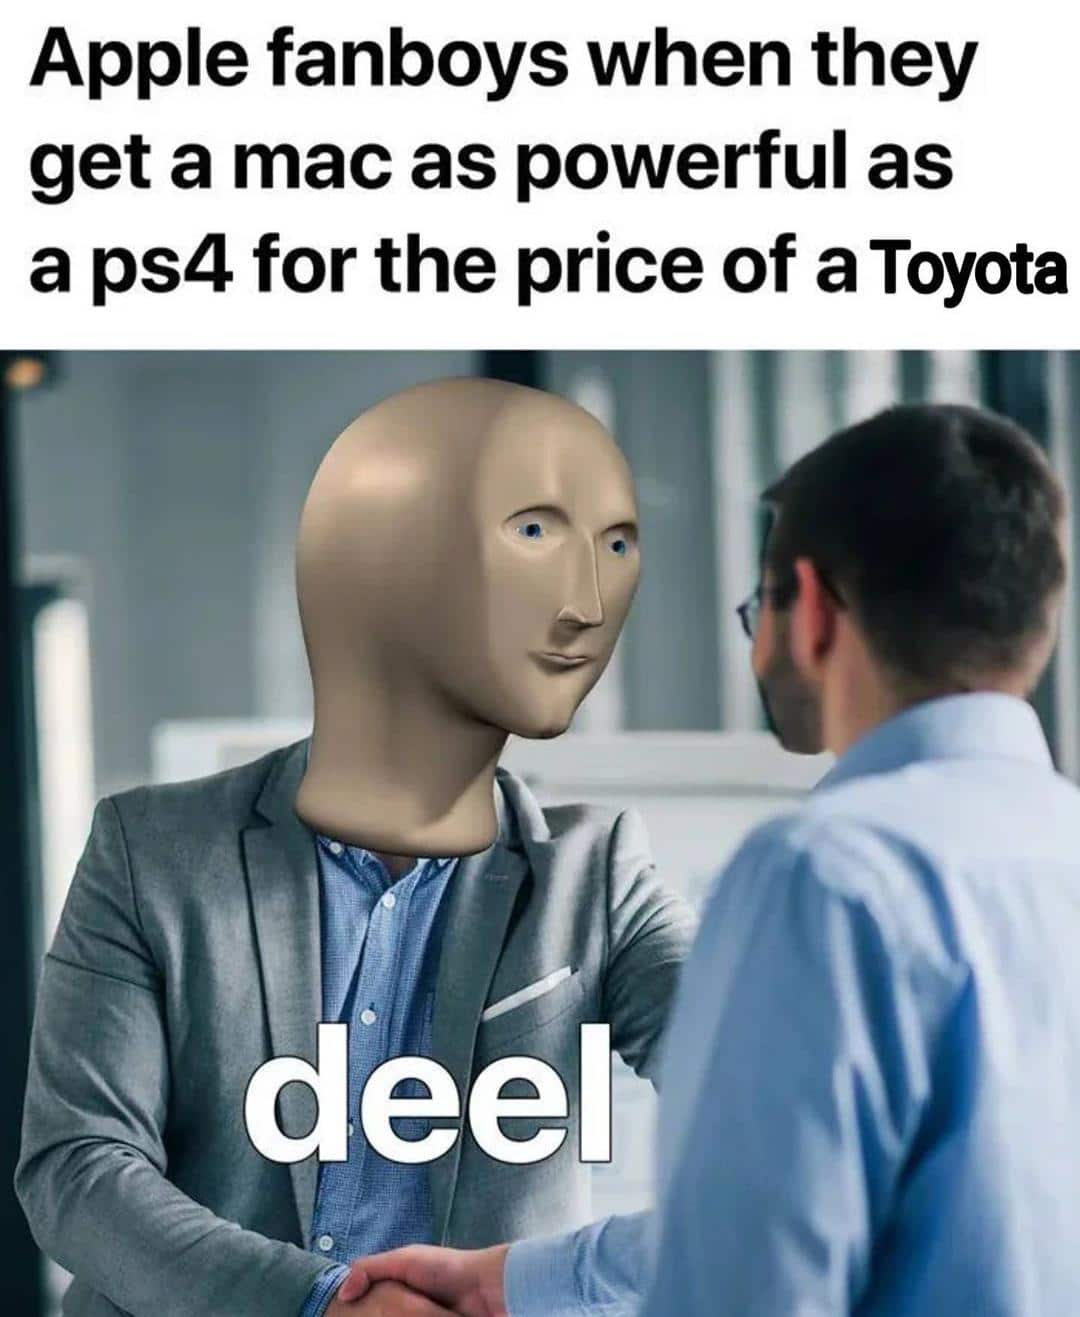 Dank, Mac, Apple, PC, YouTube, MacBook Dank Memes Dank, Mac, Apple, PC, YouTube, MacBook text: Apple fanboys when they get a mac as powerful as a ps4 for the price of a Toyota deel 